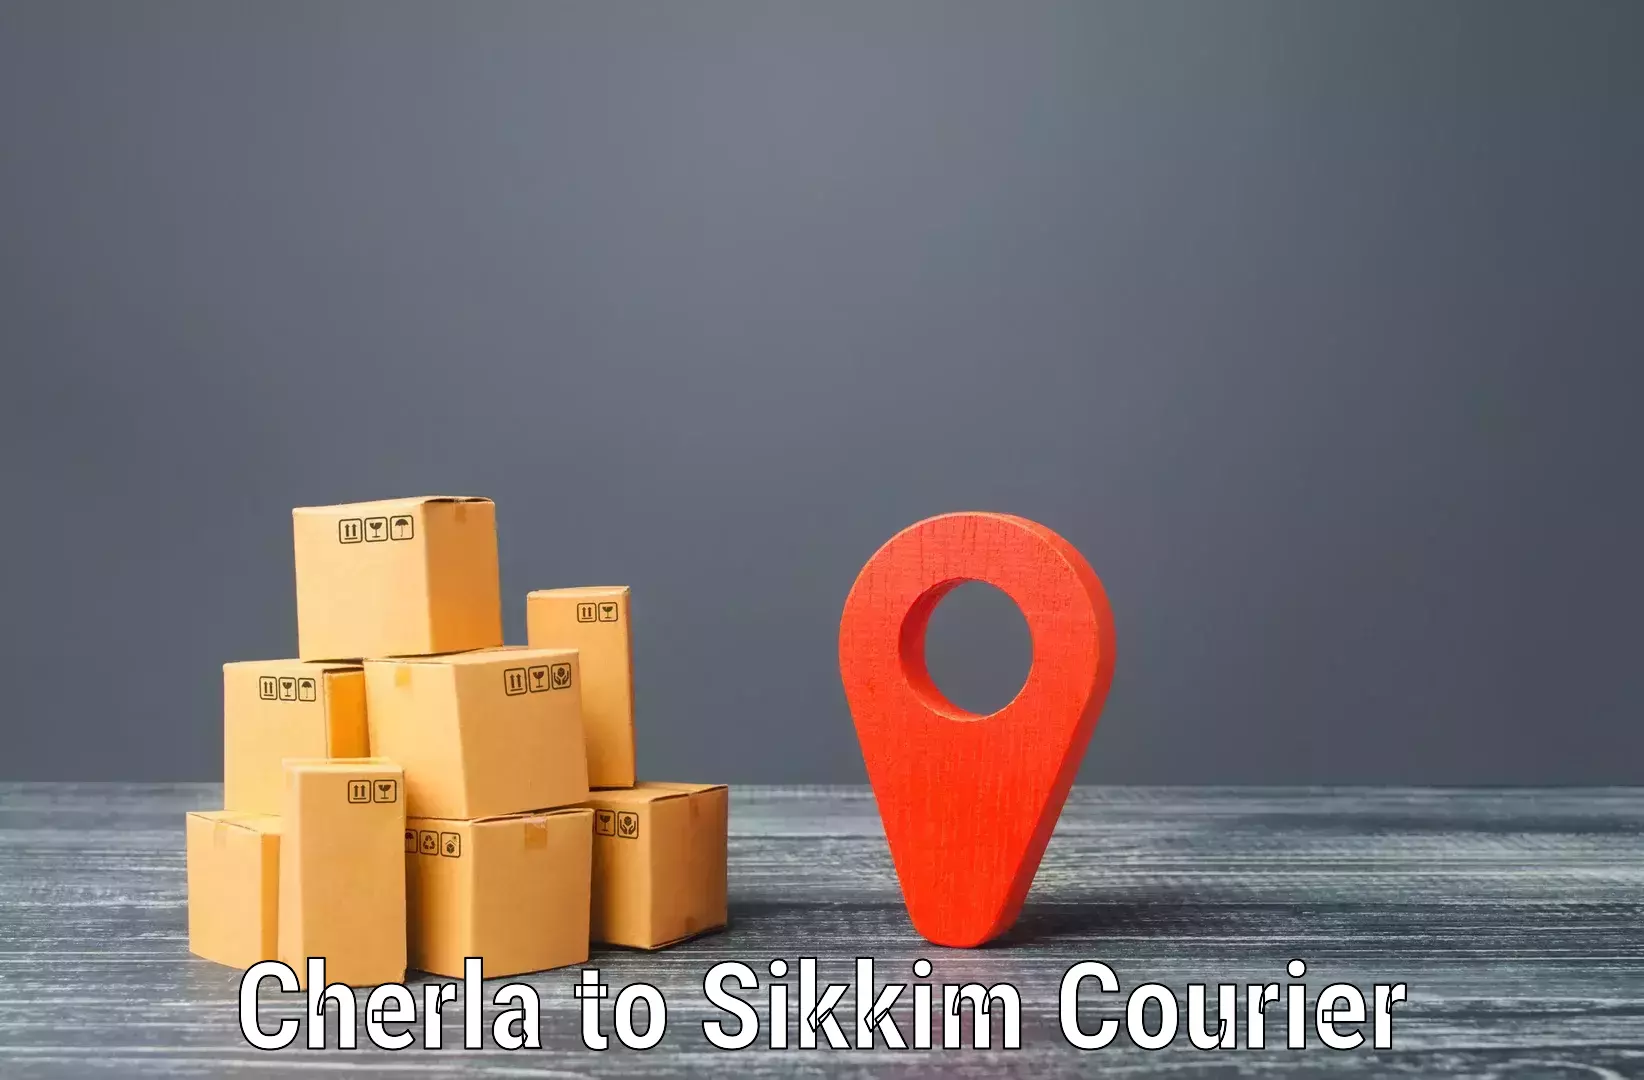 Professional courier handling Cherla to Pelling